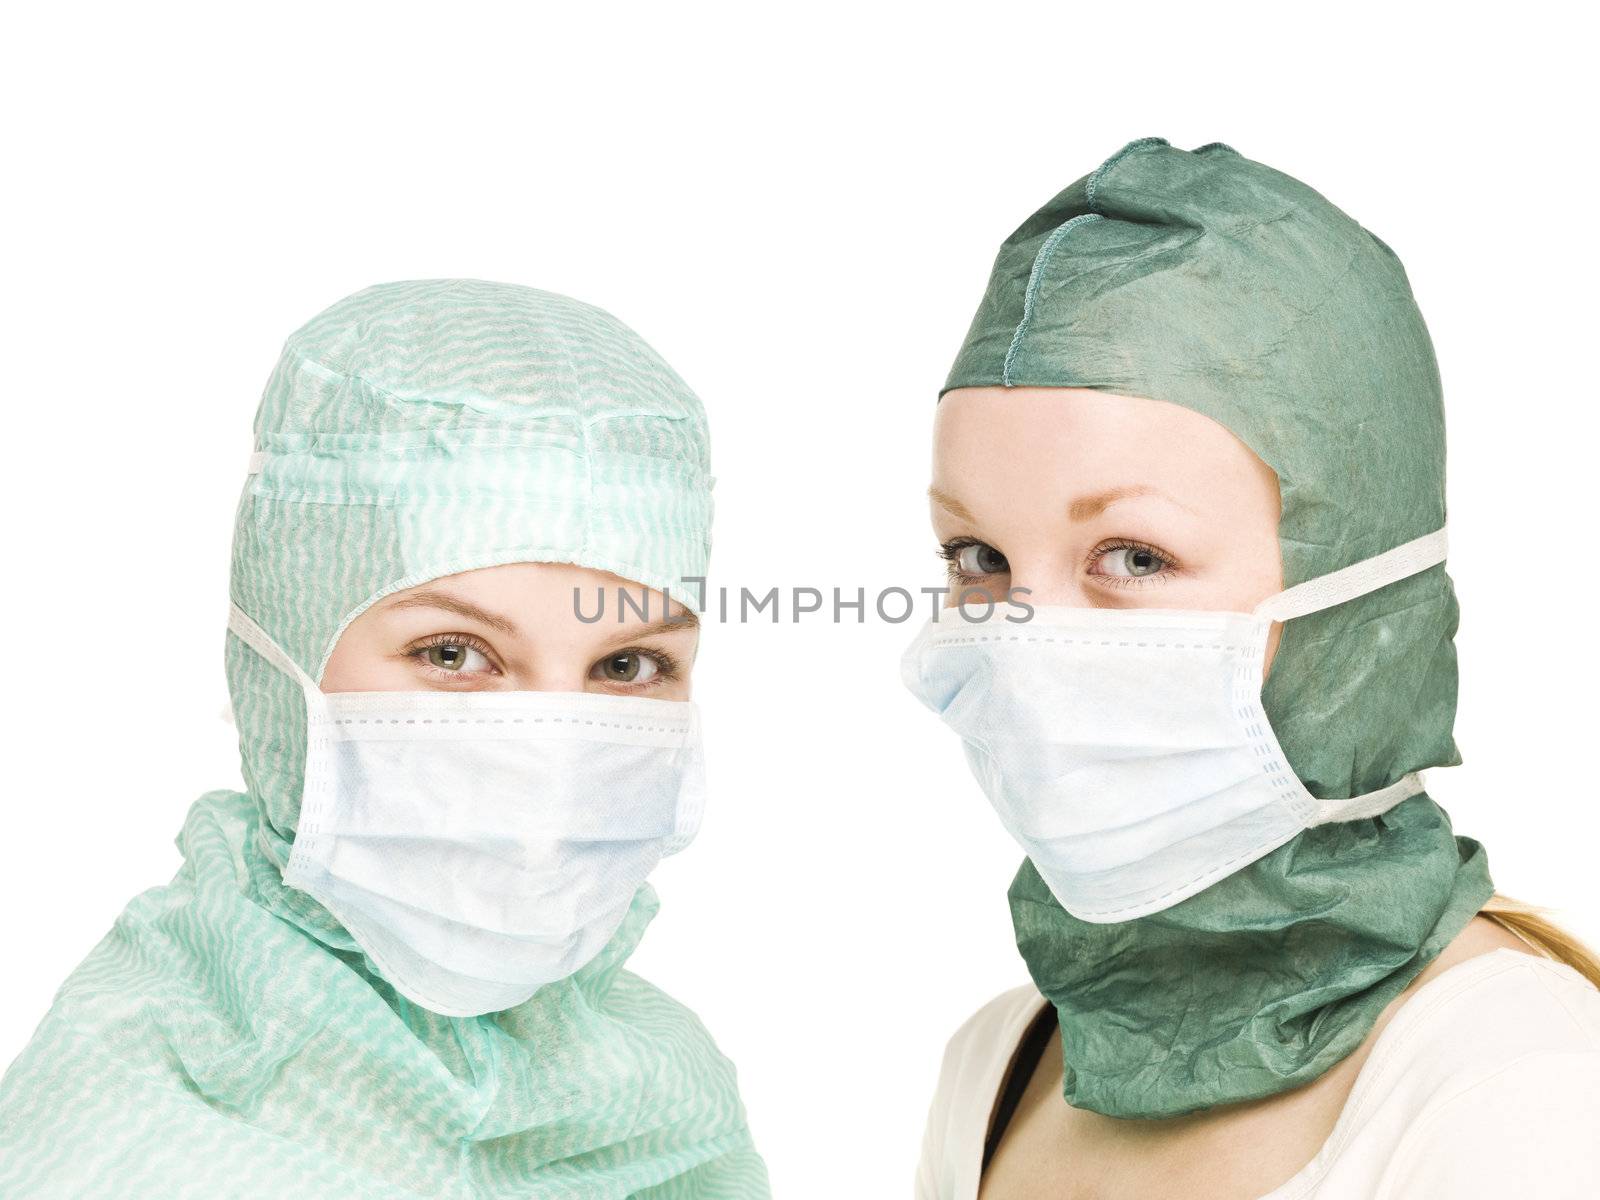 Girls with Surgical masks by gemenacom